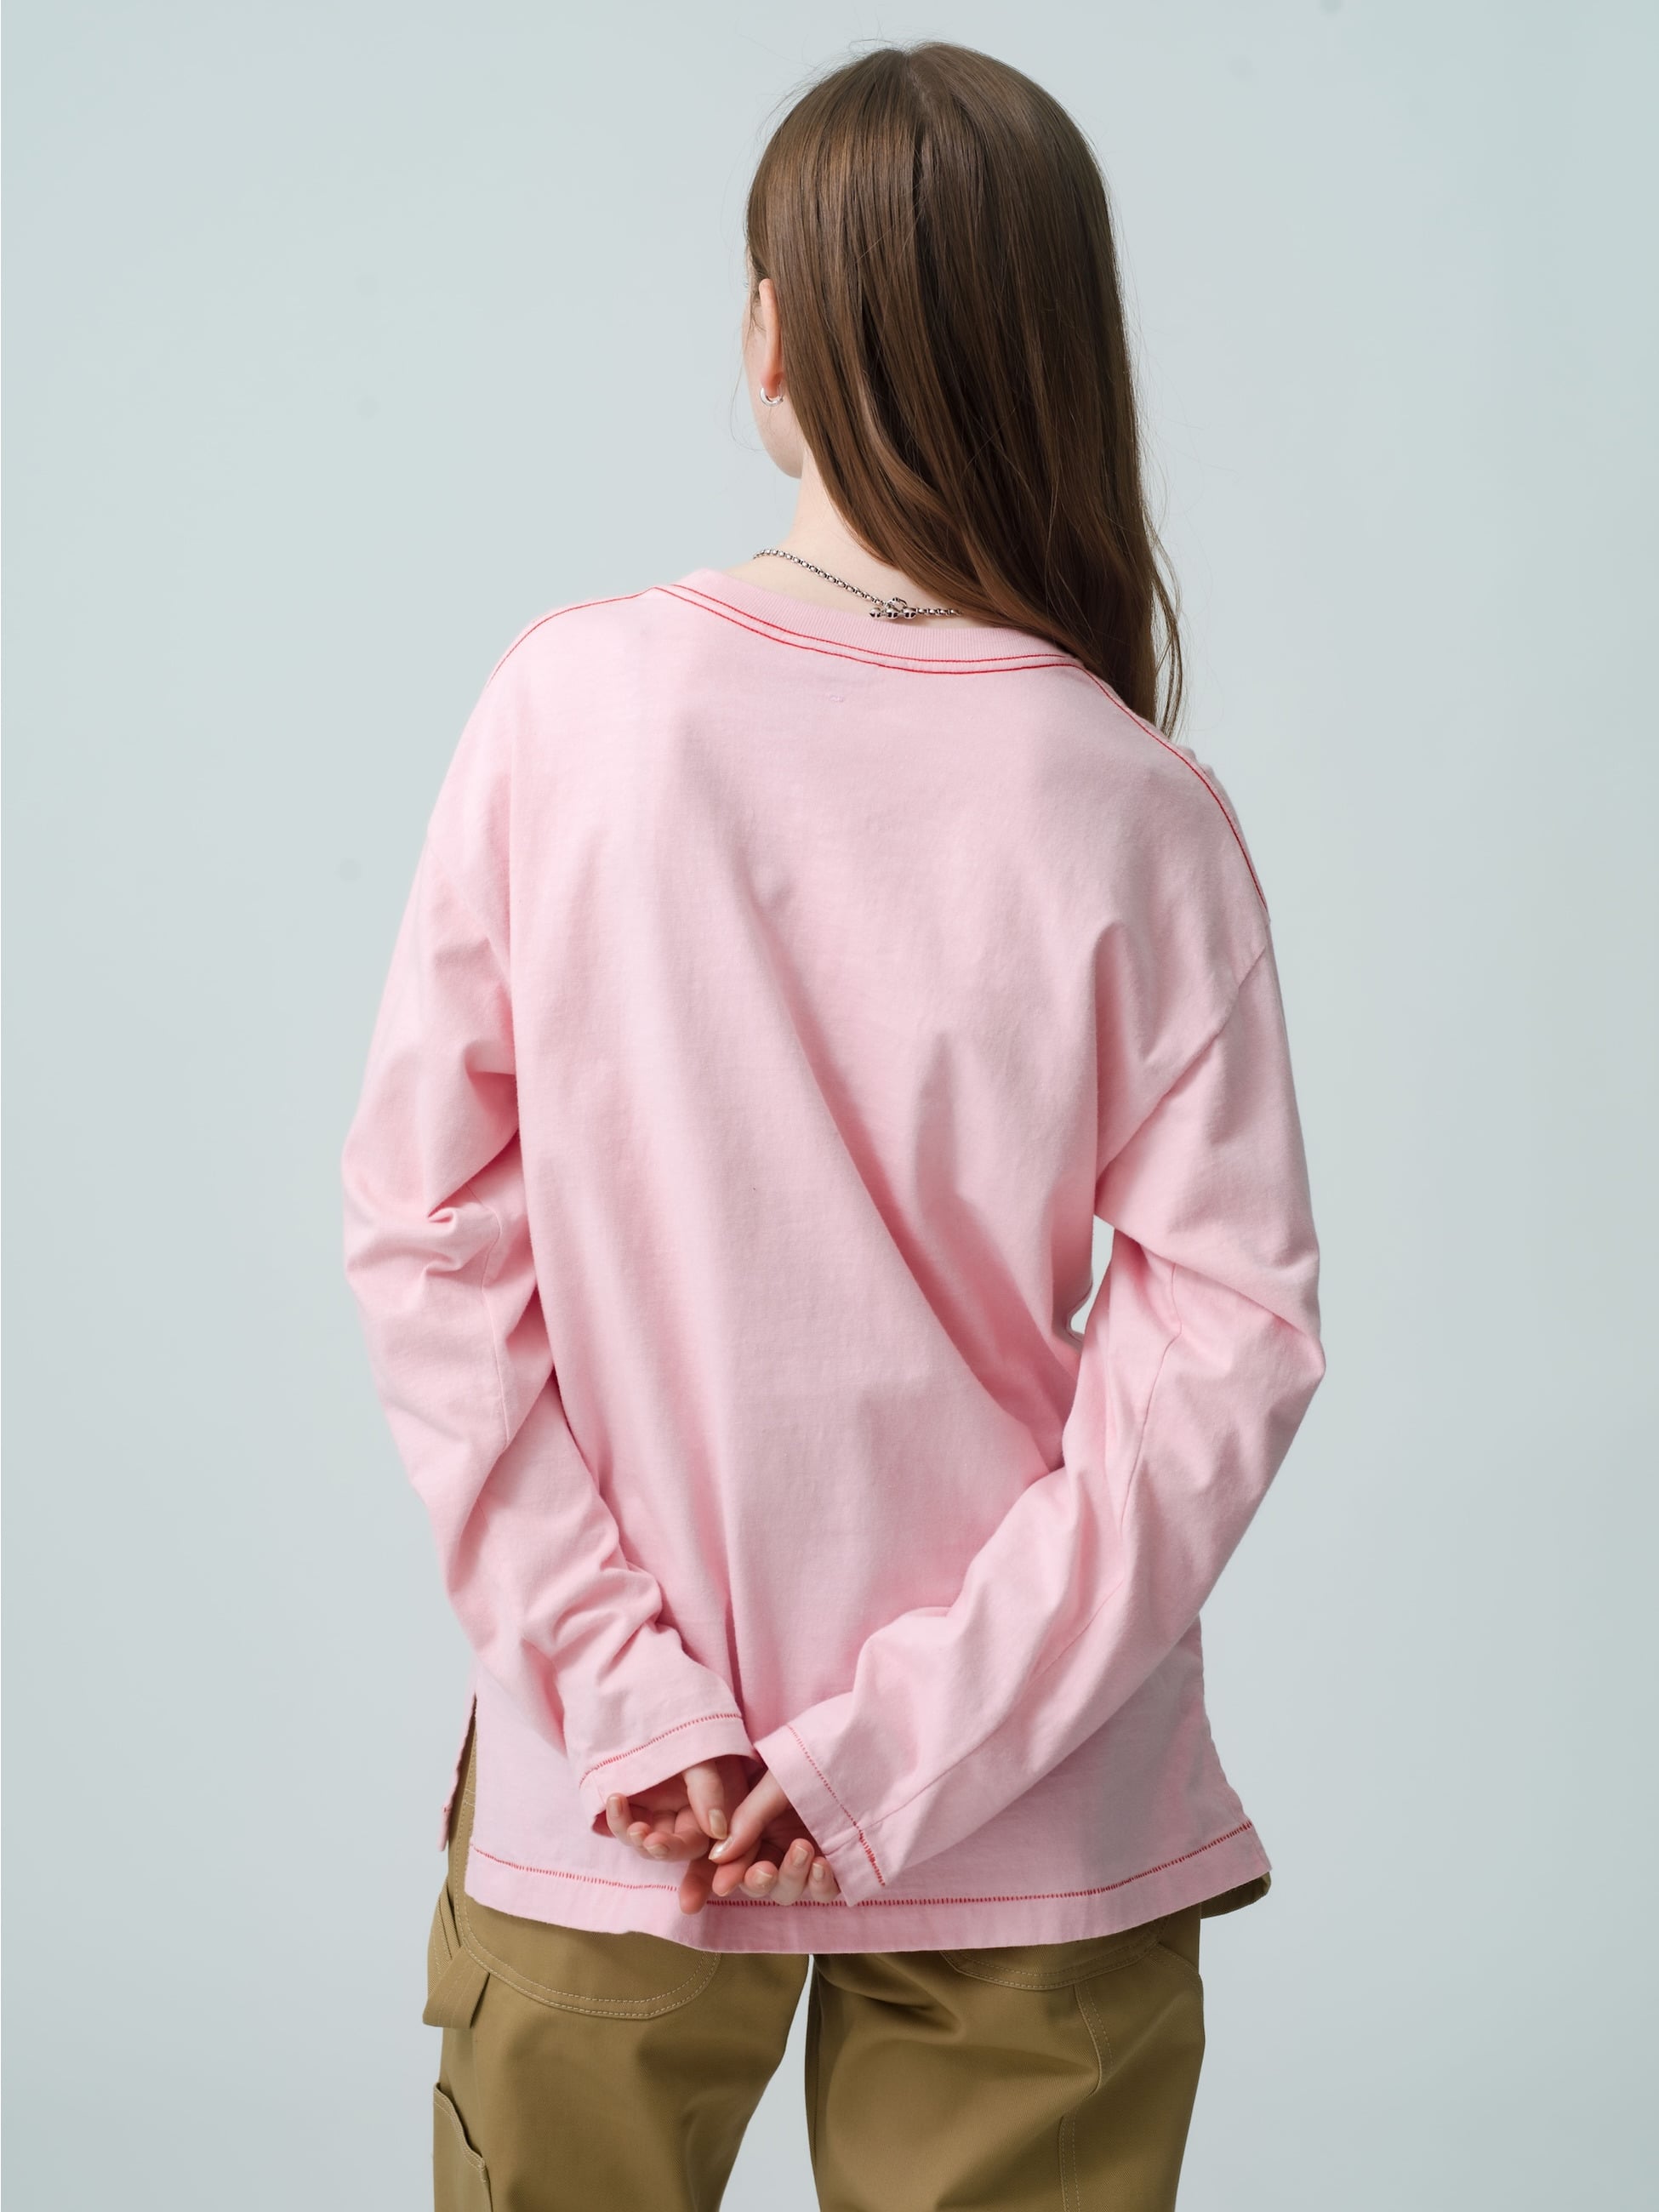 Ollier Long Sleeve Tee (white / pink / navy) 詳細画像 pink 3